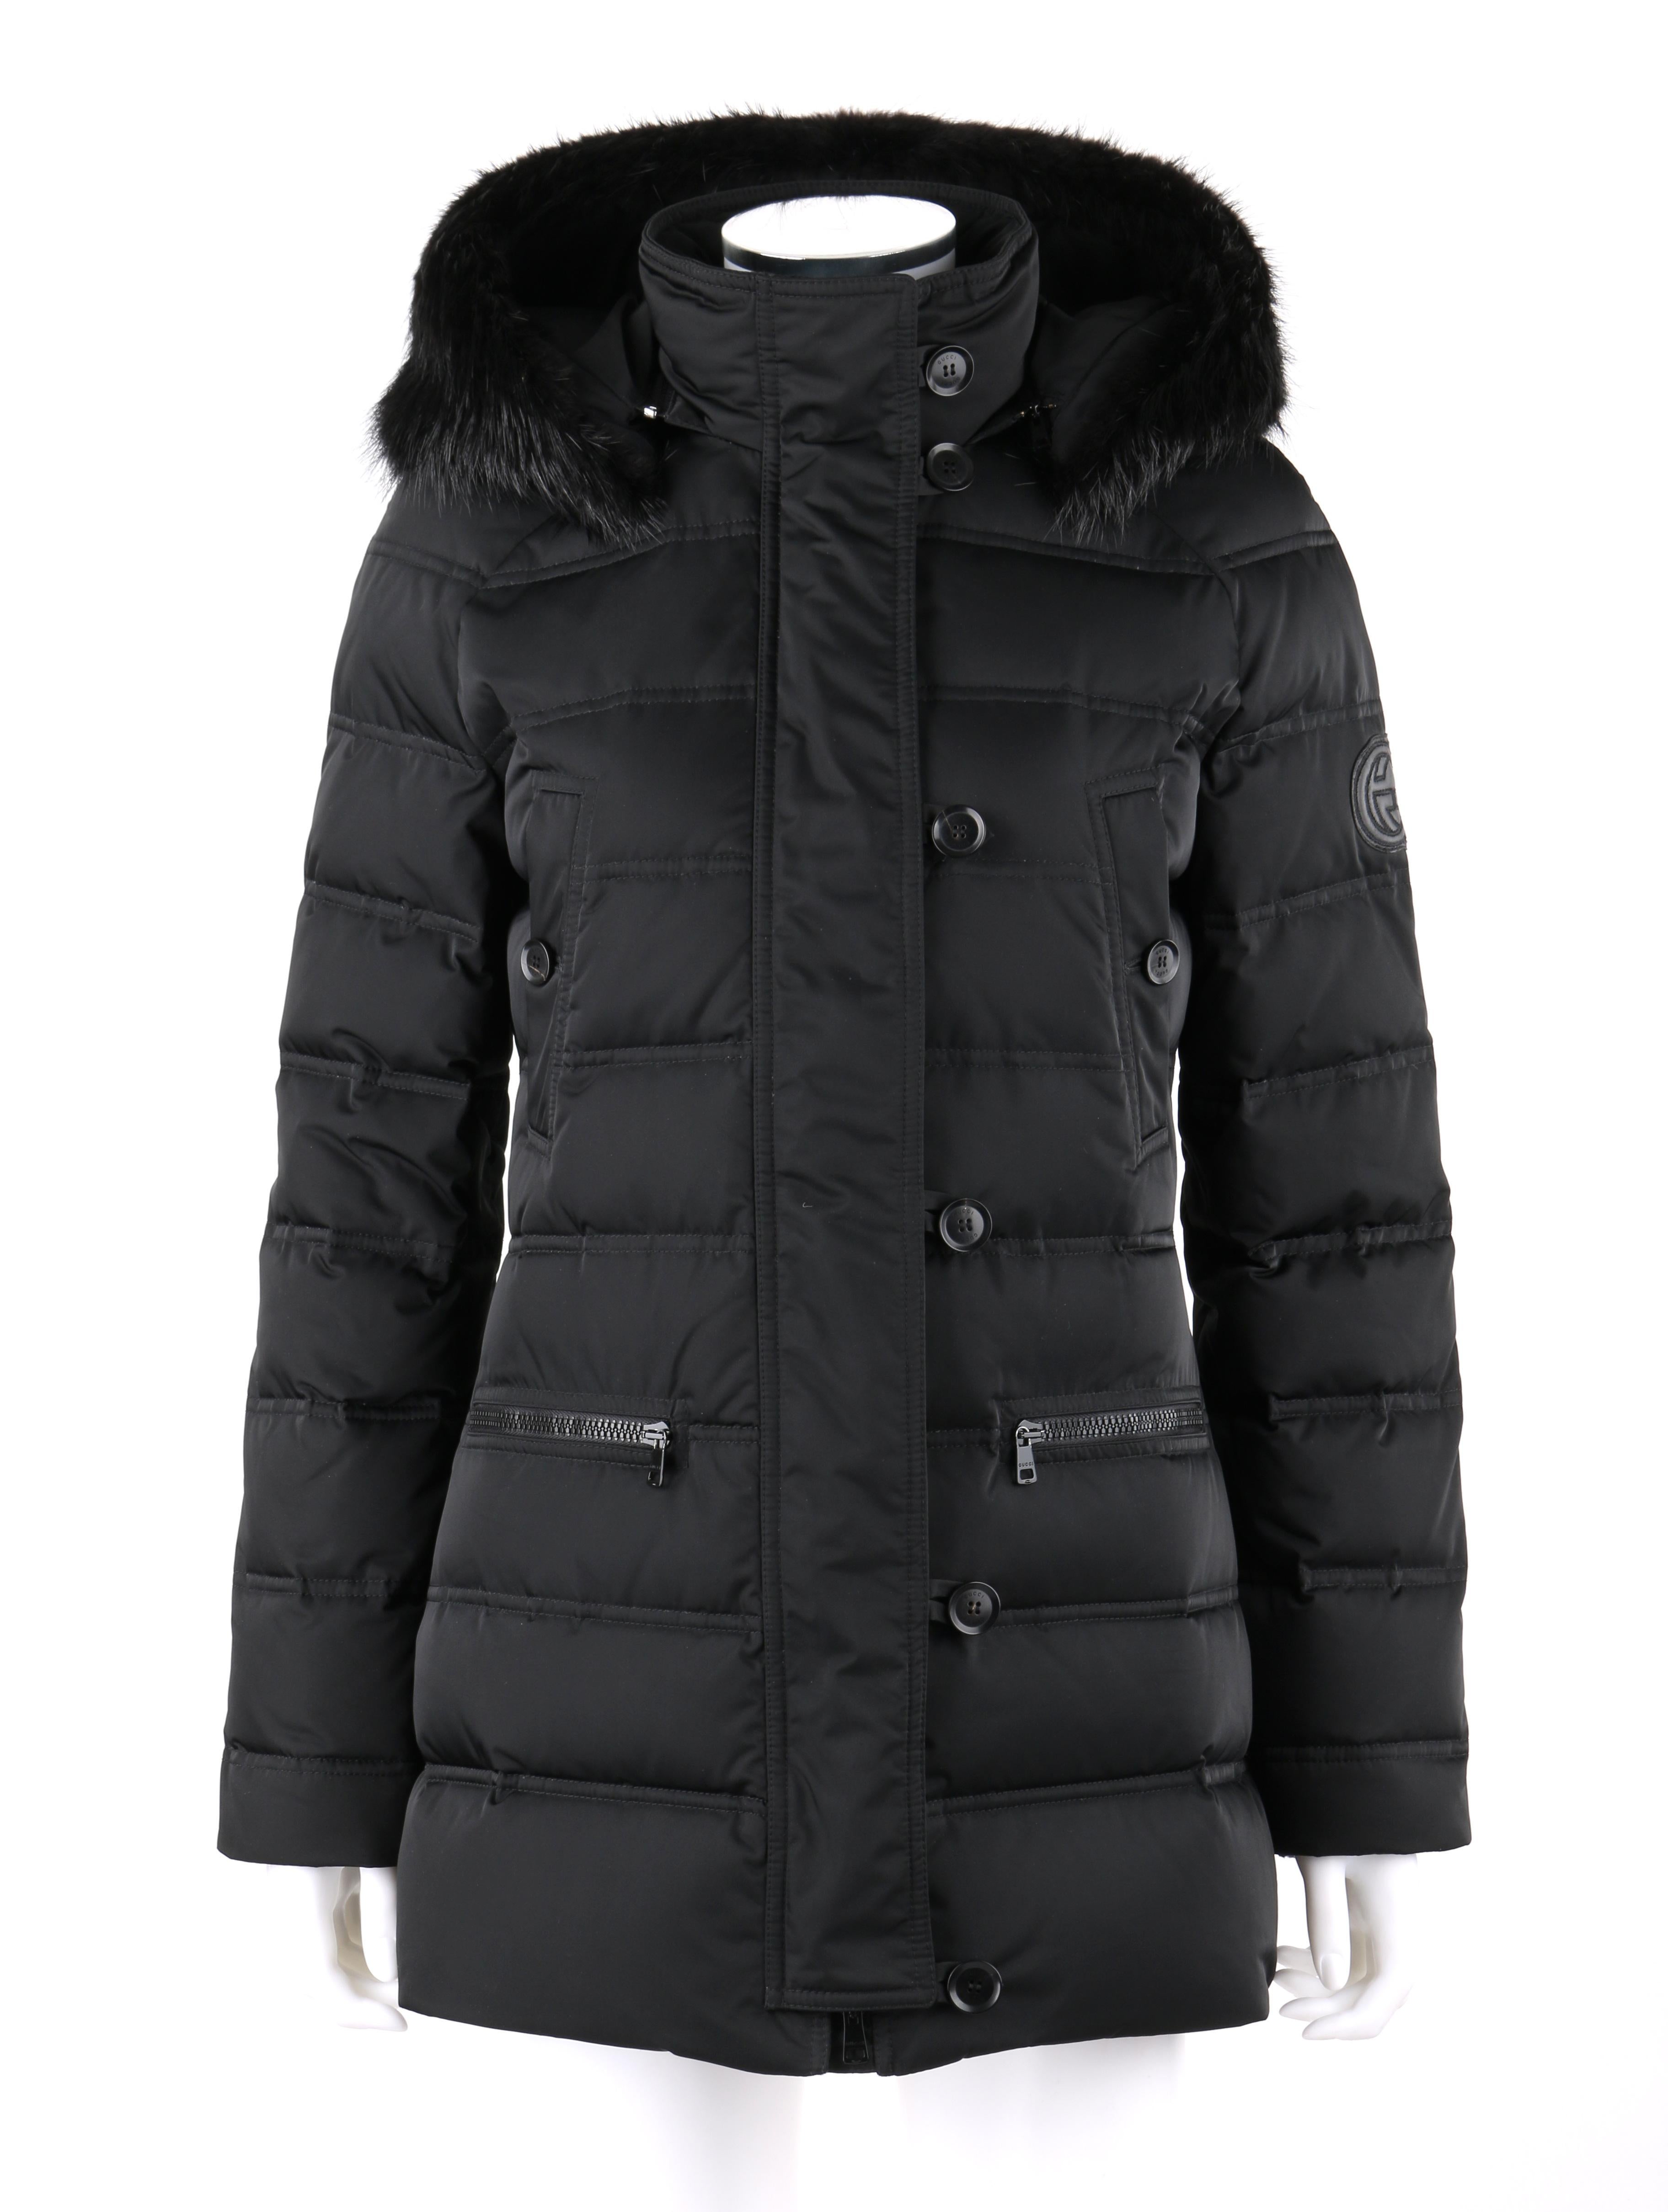 DESCRIPTION: GUCCI A/W 2013 Black Channel Quilted Beaver Fur Trim Hooded Down Puffer Coat
 
Estimated Retail: $3295
 
Brand / Manufacturer: Gucci
Collection: Autumn / Winter 2013
Designer: Frida Giannini
Style: Puffer coat
Color(s): Black
Lined: